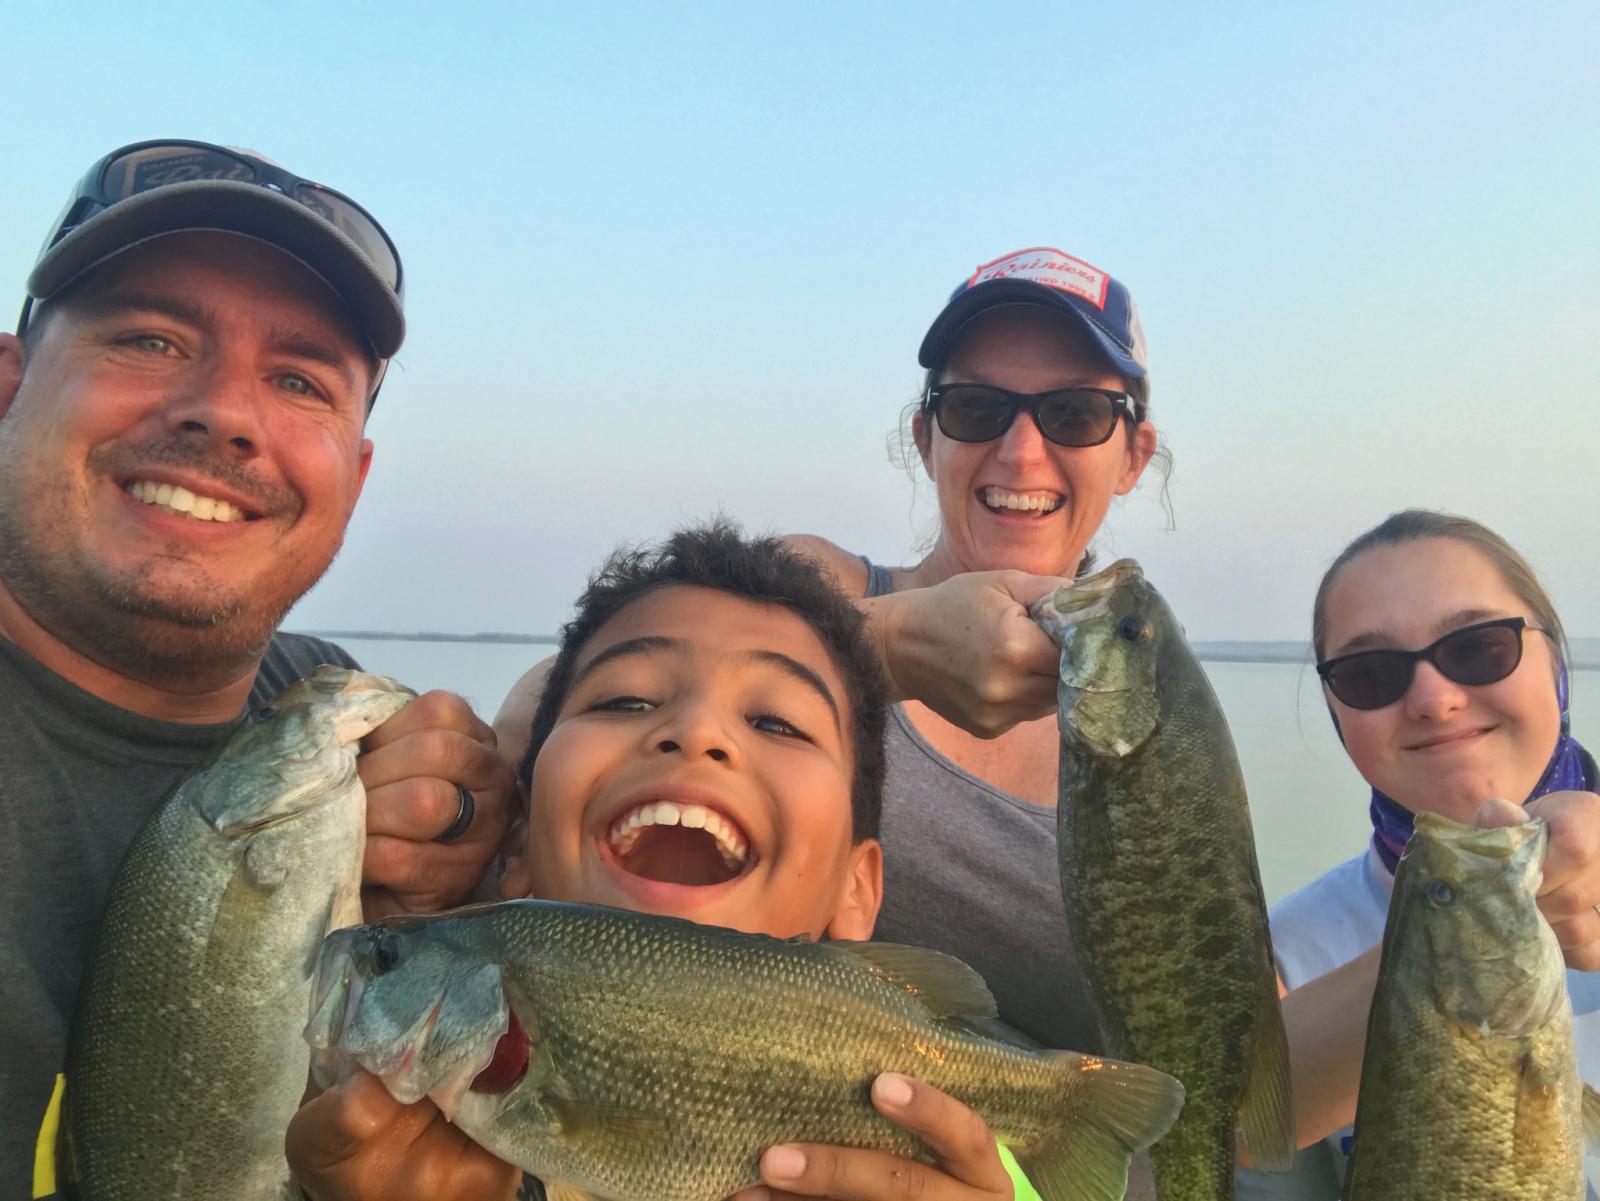 family fishing for bass, all smiles